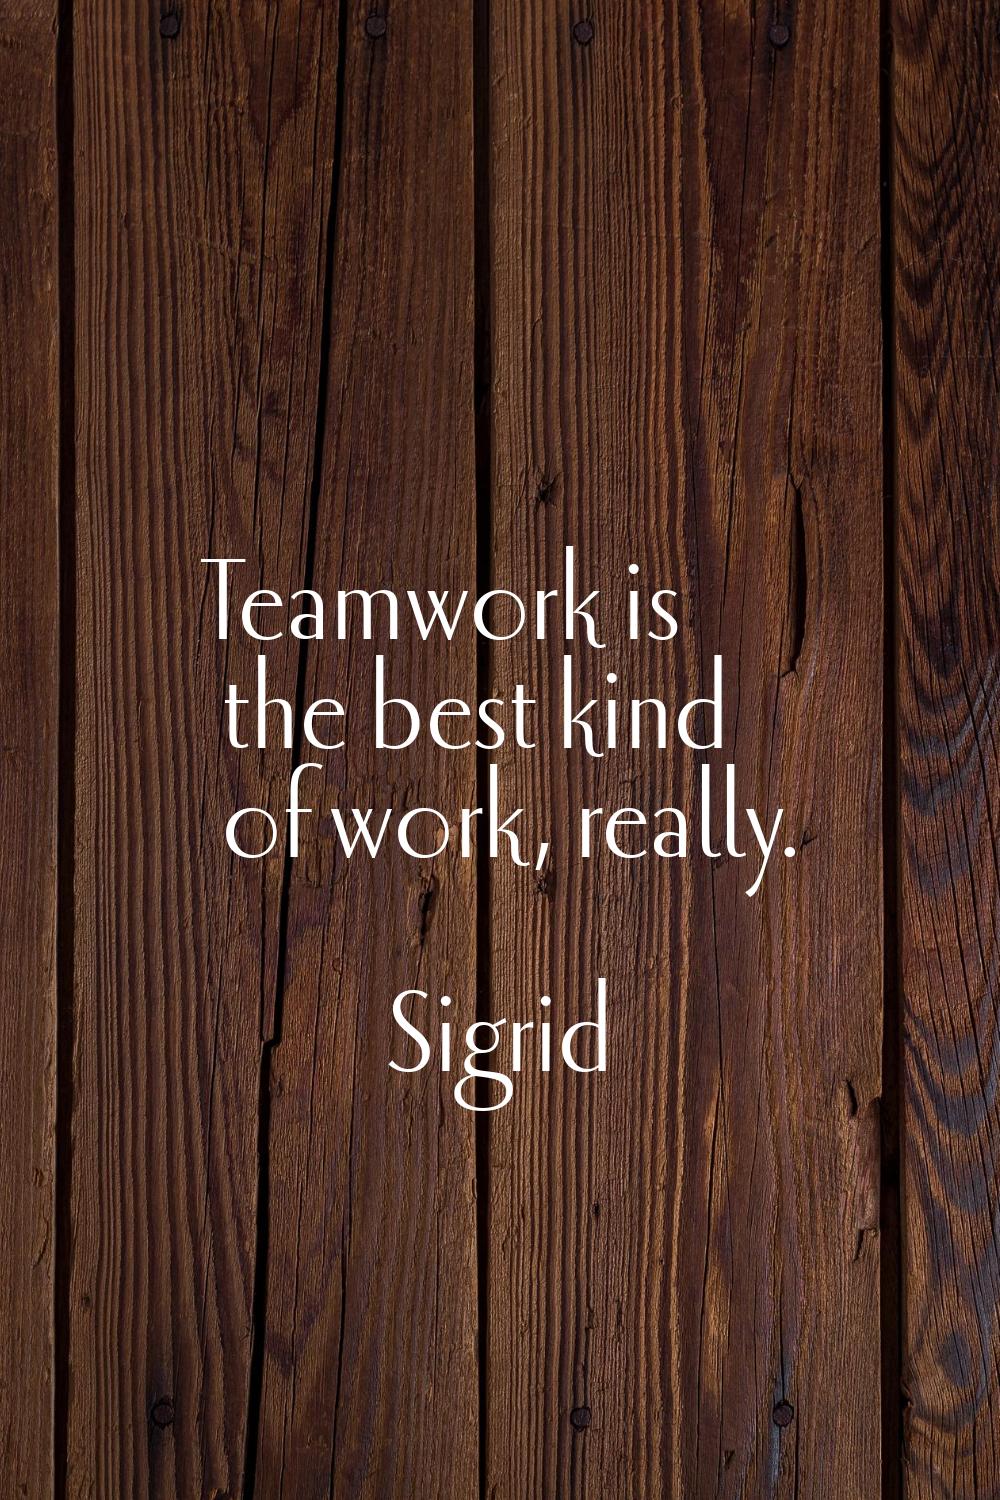 Teamwork is the best kind of work, really.